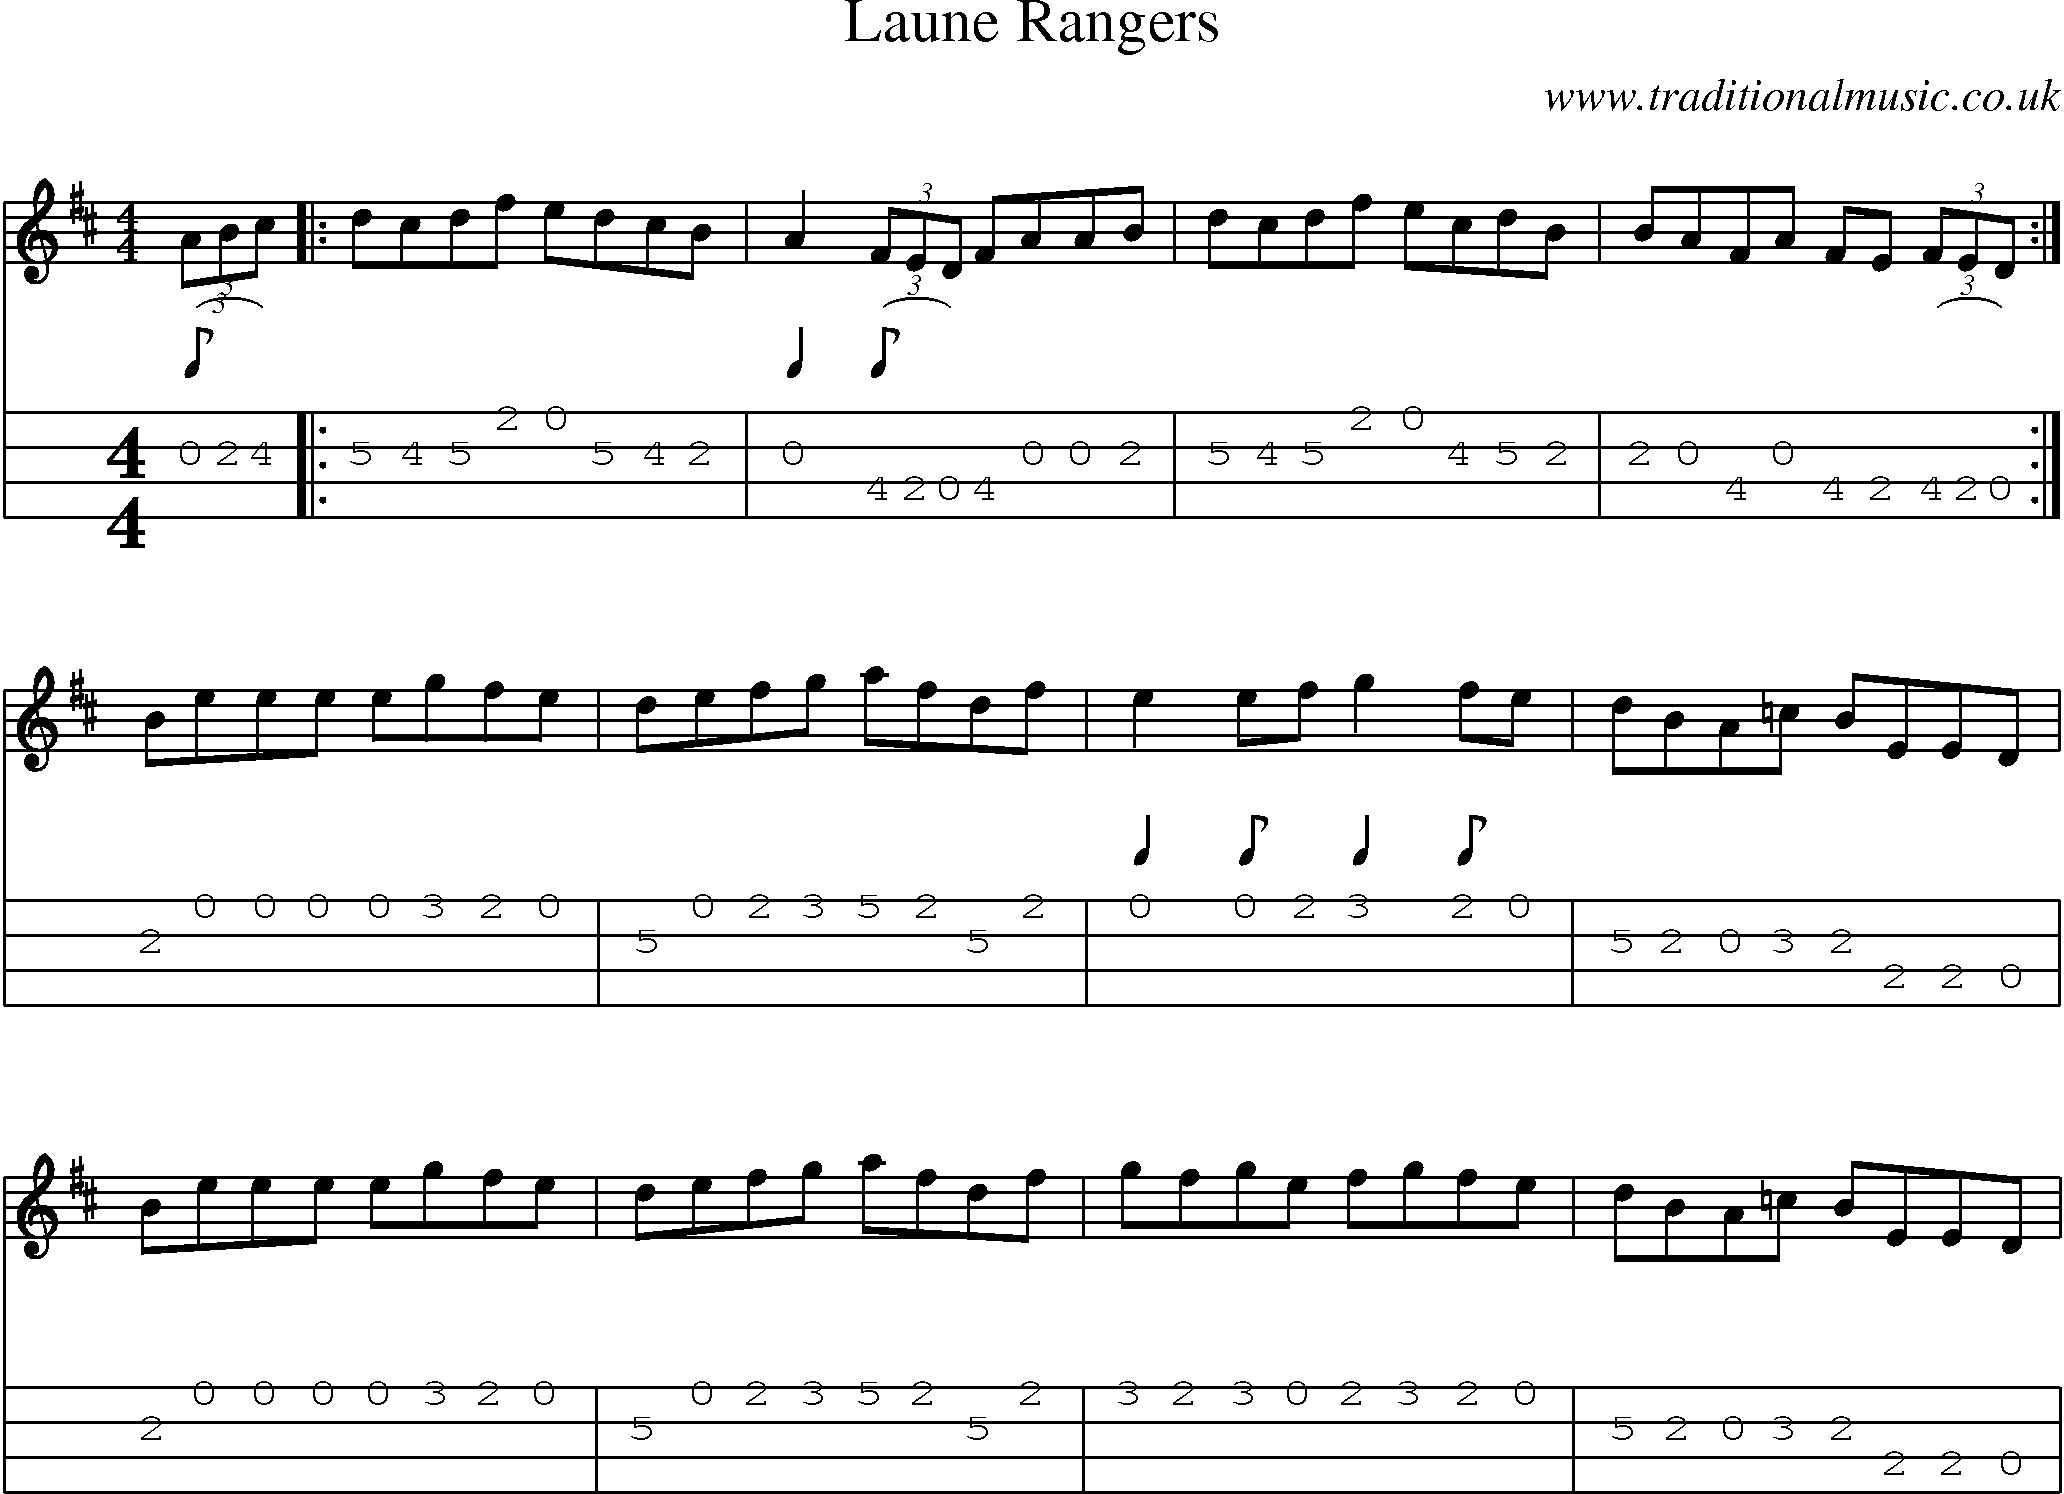 Music Score and Mandolin Tabs for Laune Rangers